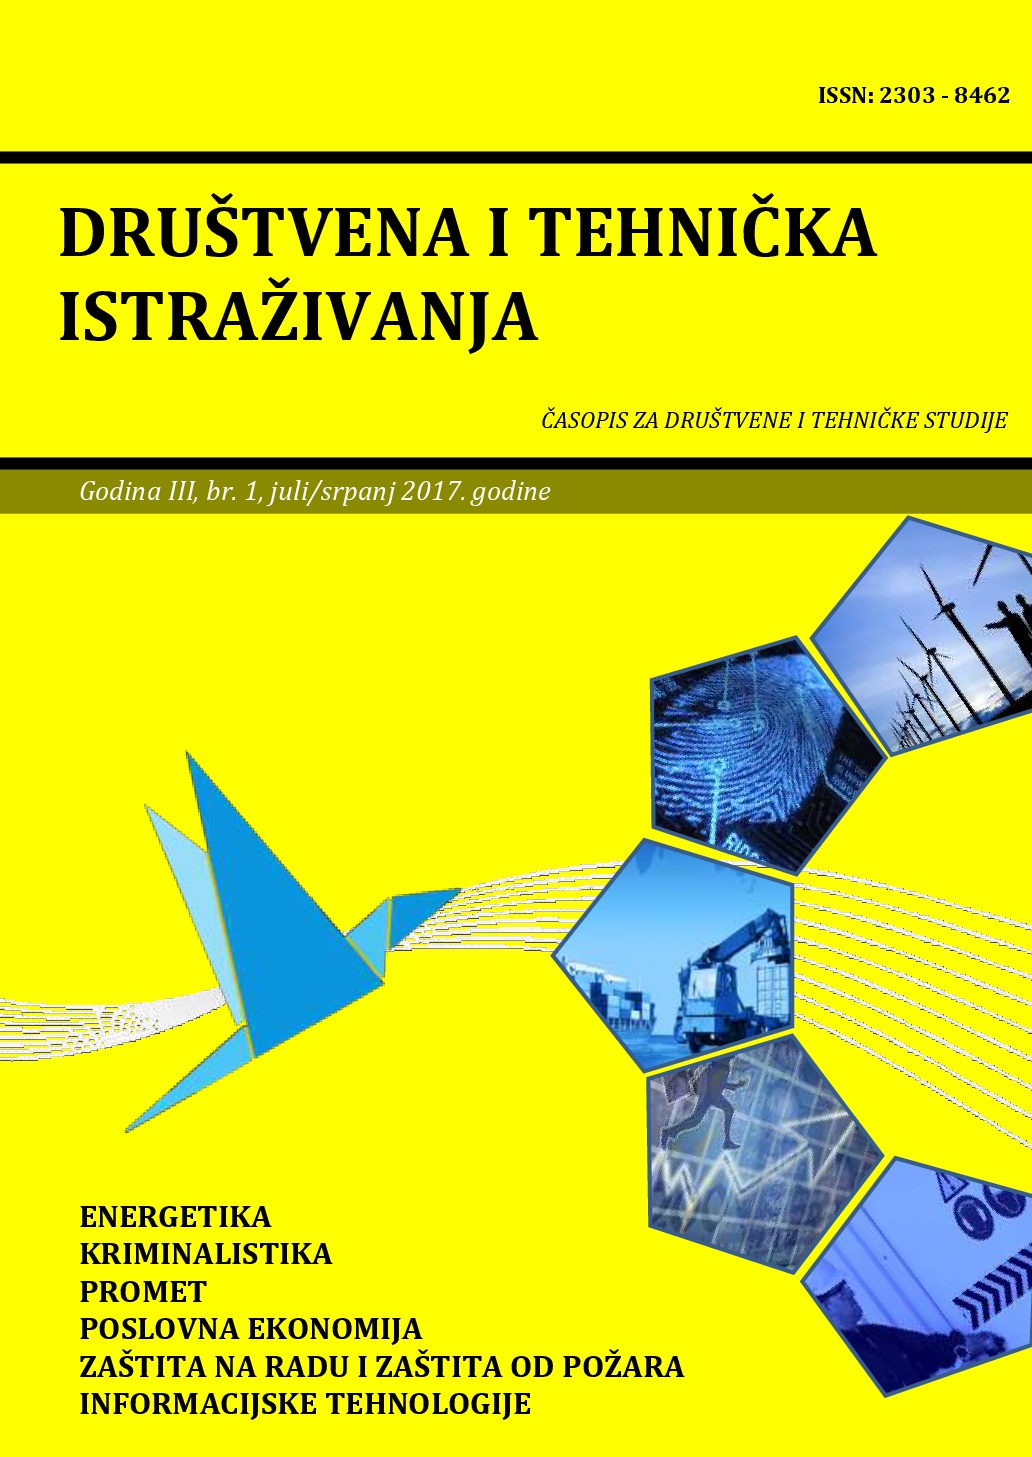 Principles of Action of Civil Servants and Public Administration Management in Bosnia and Herzegovina Cover Image